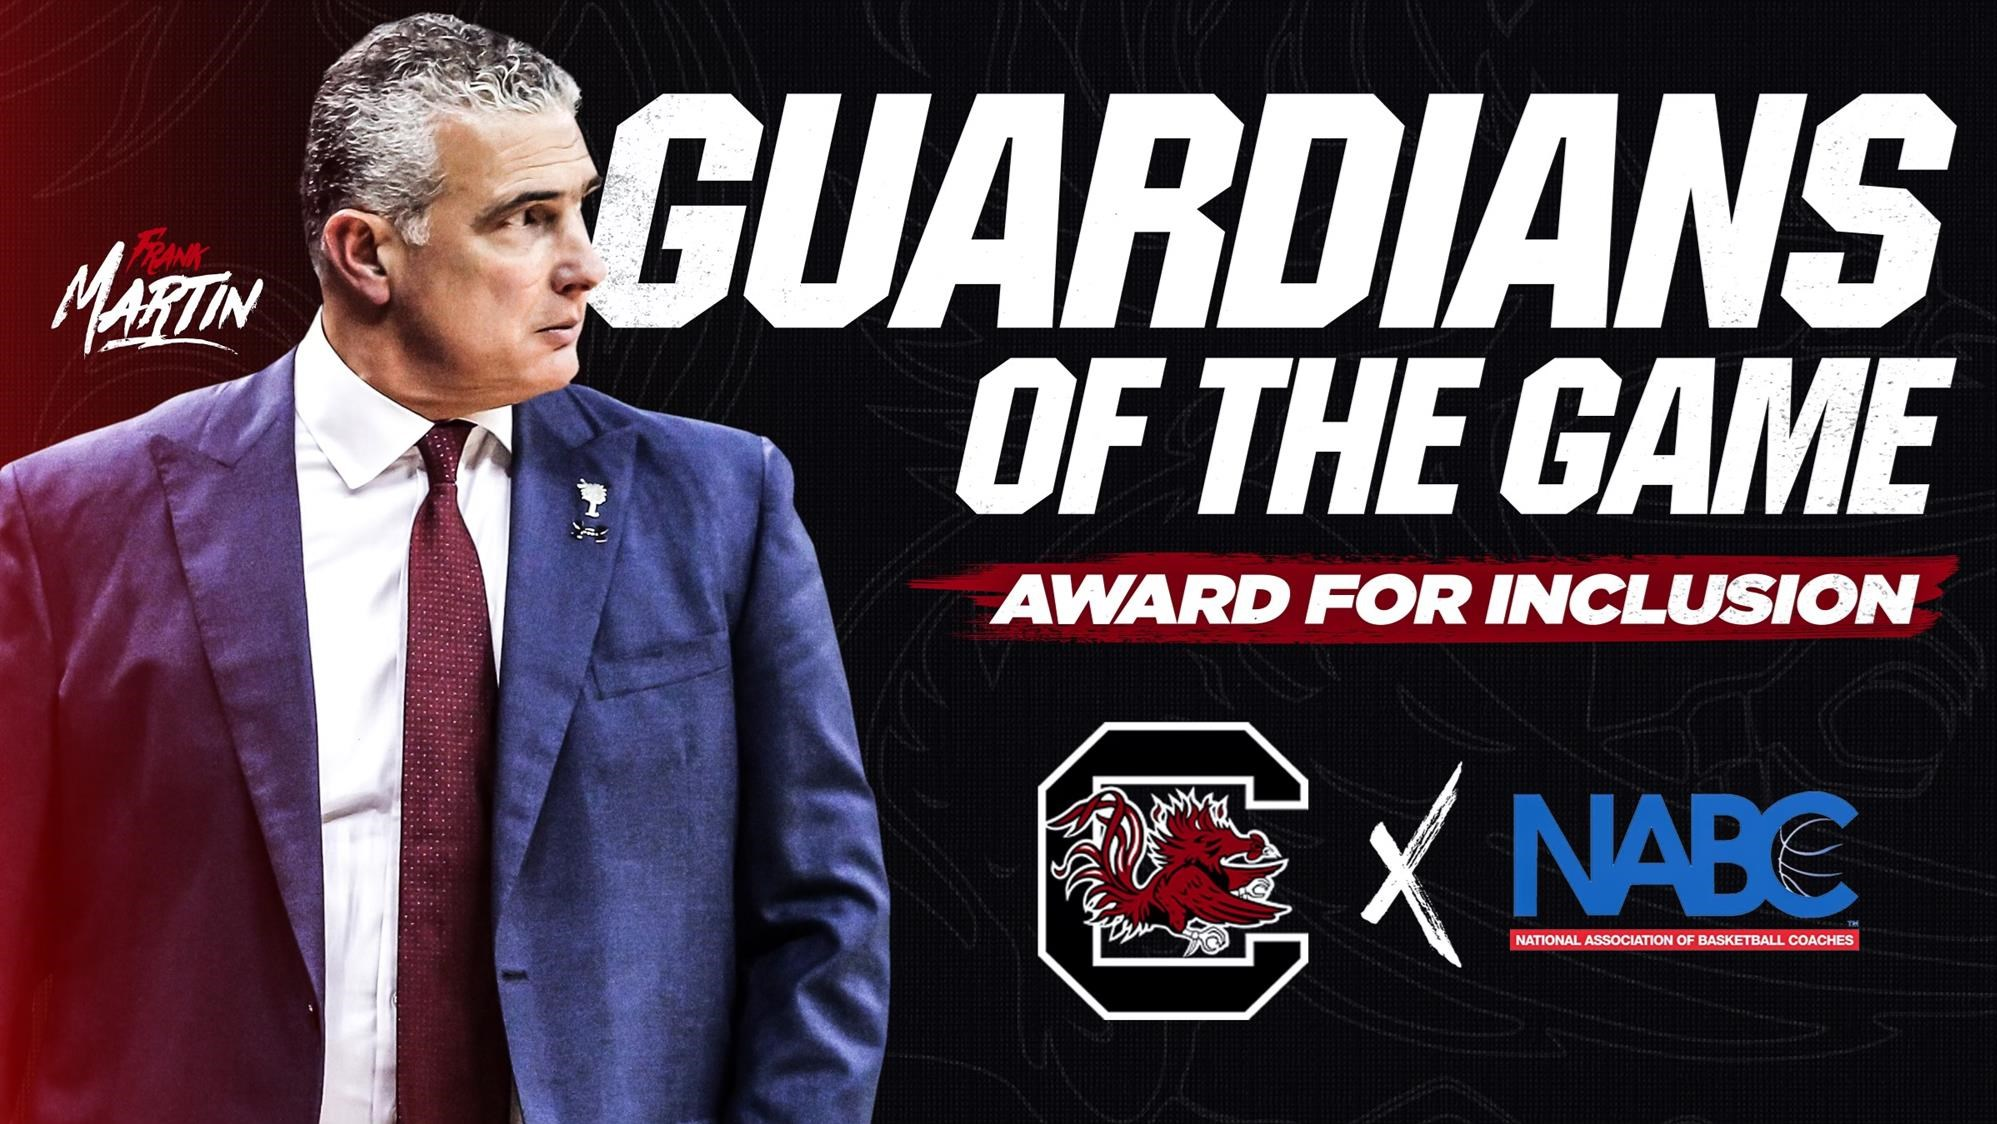 Martin To Receive NABC Guardians Of The Game Award For Inclusion